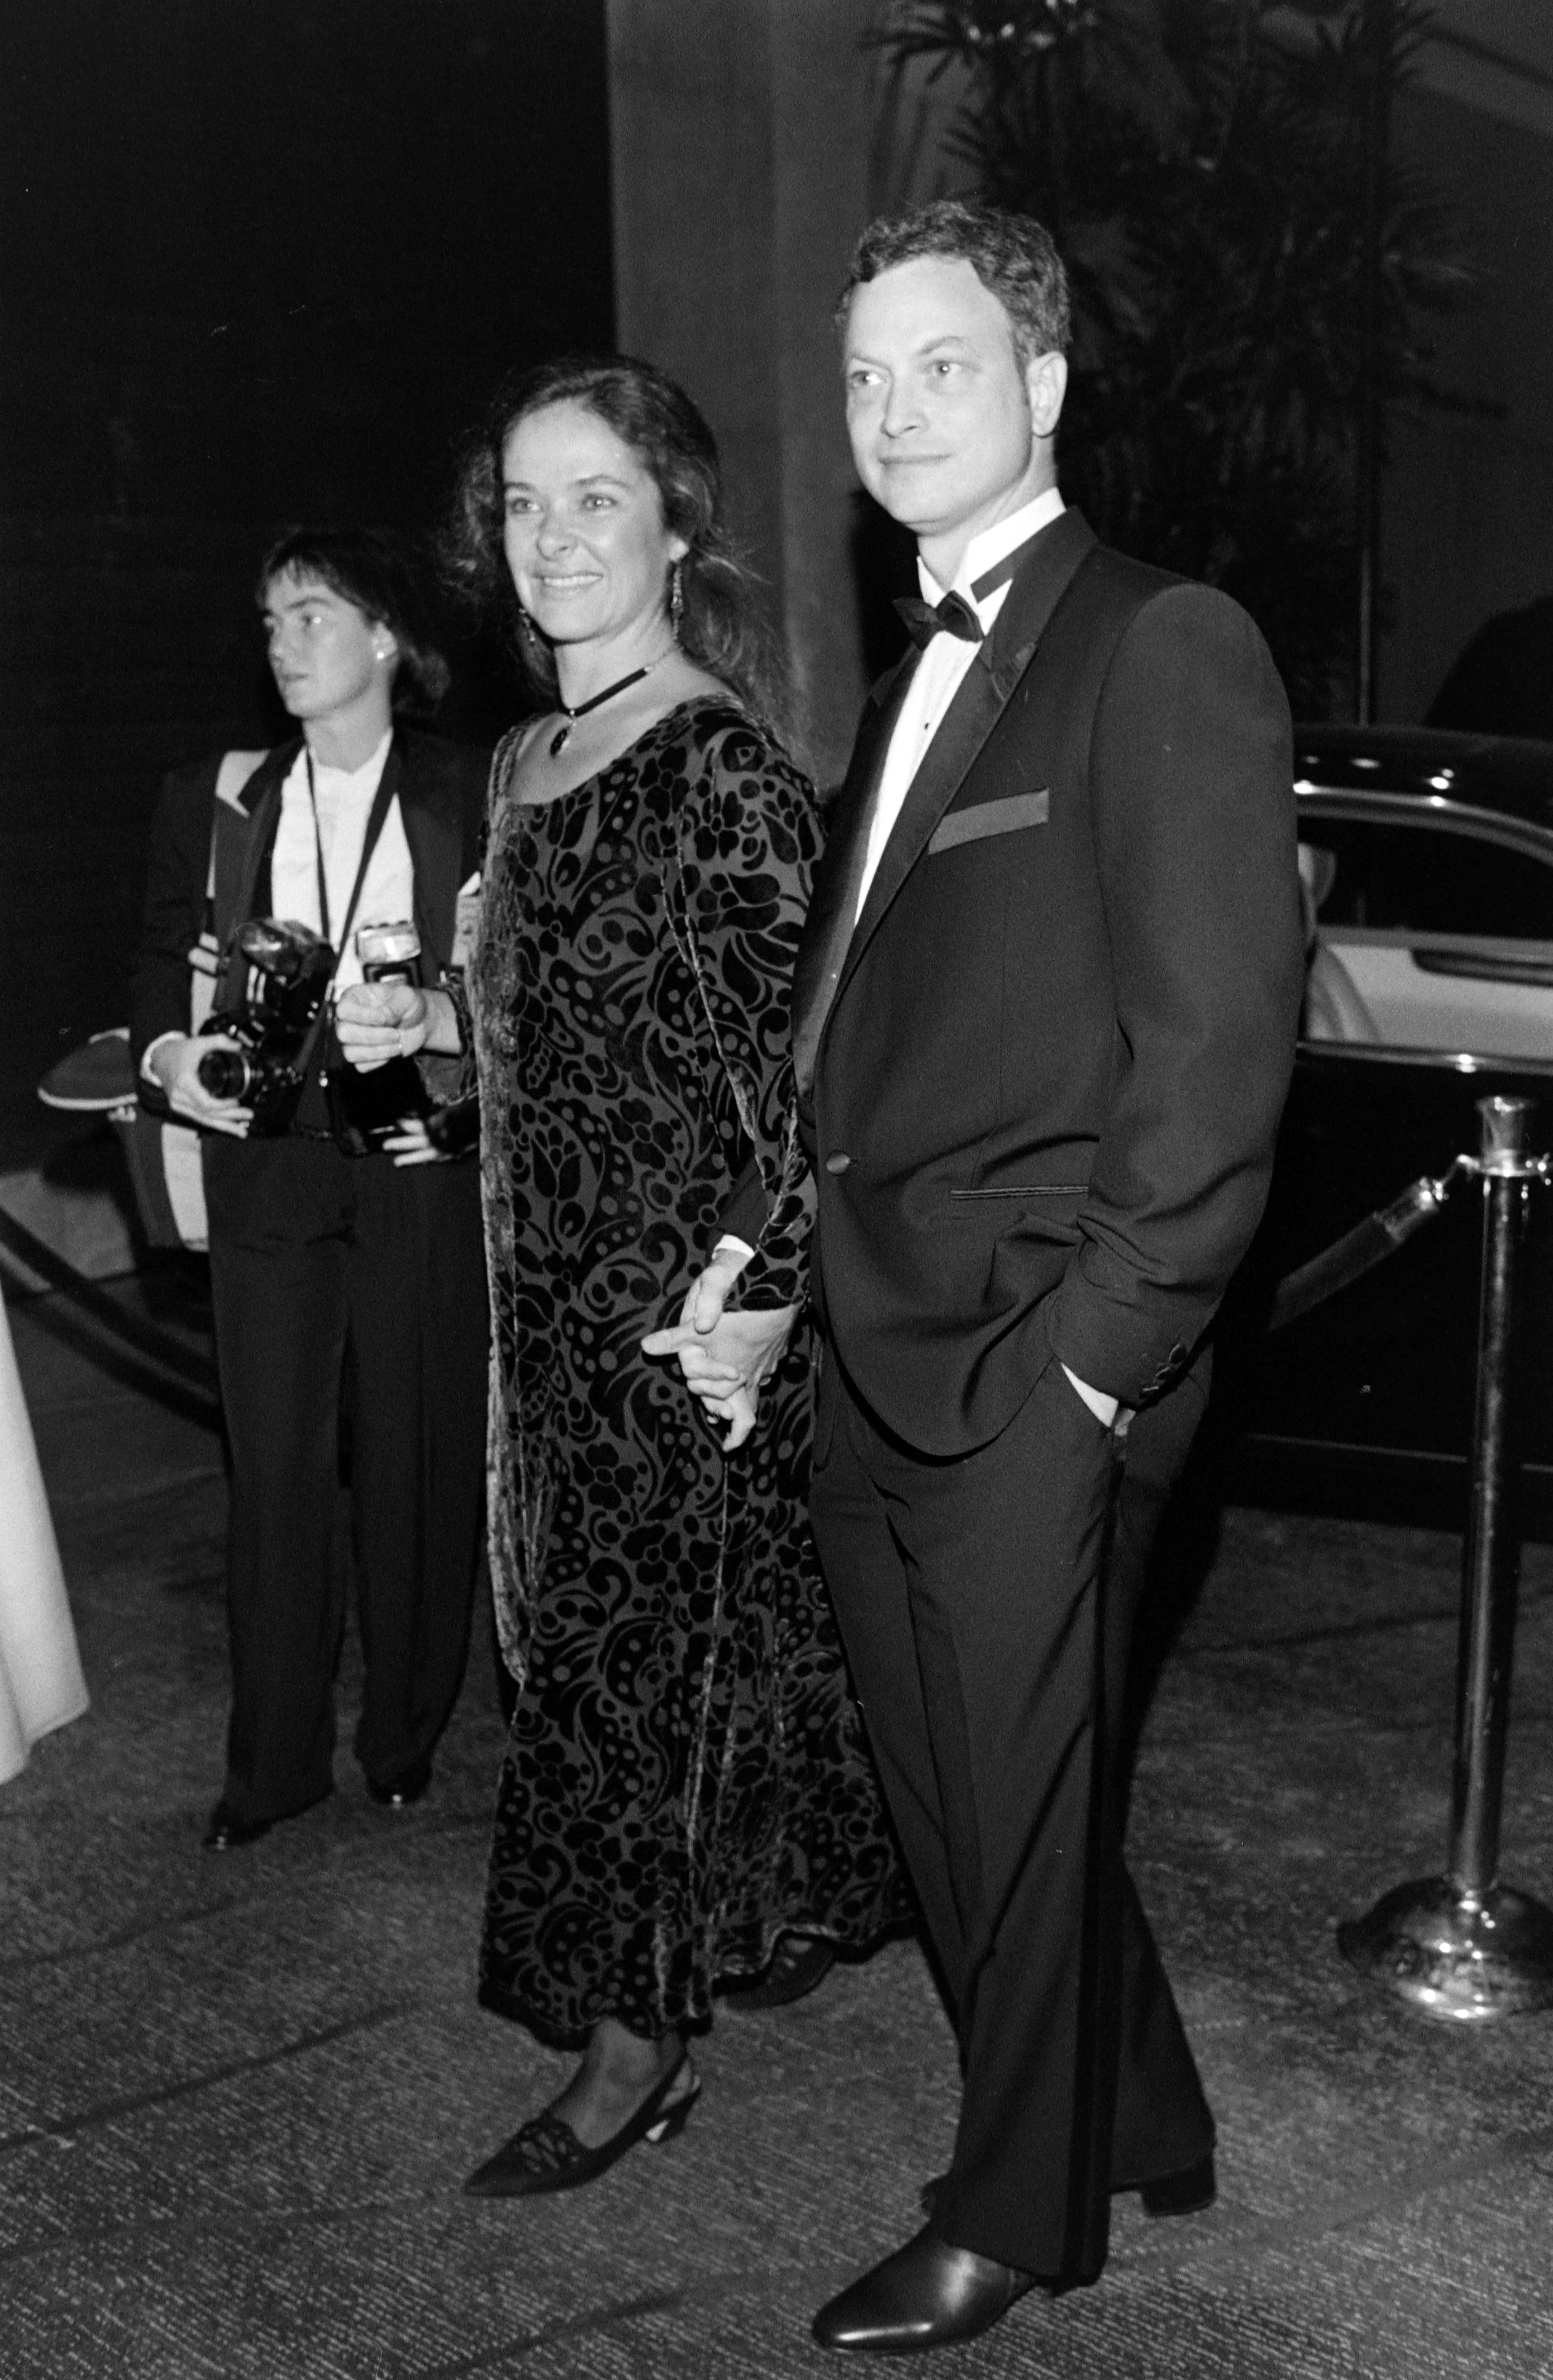 Moira Harris and Gary Sinise at an event at the Beverly Hilton Hotel in Beverly Hills, California, on October 28, 1994 | Source: Getty Images